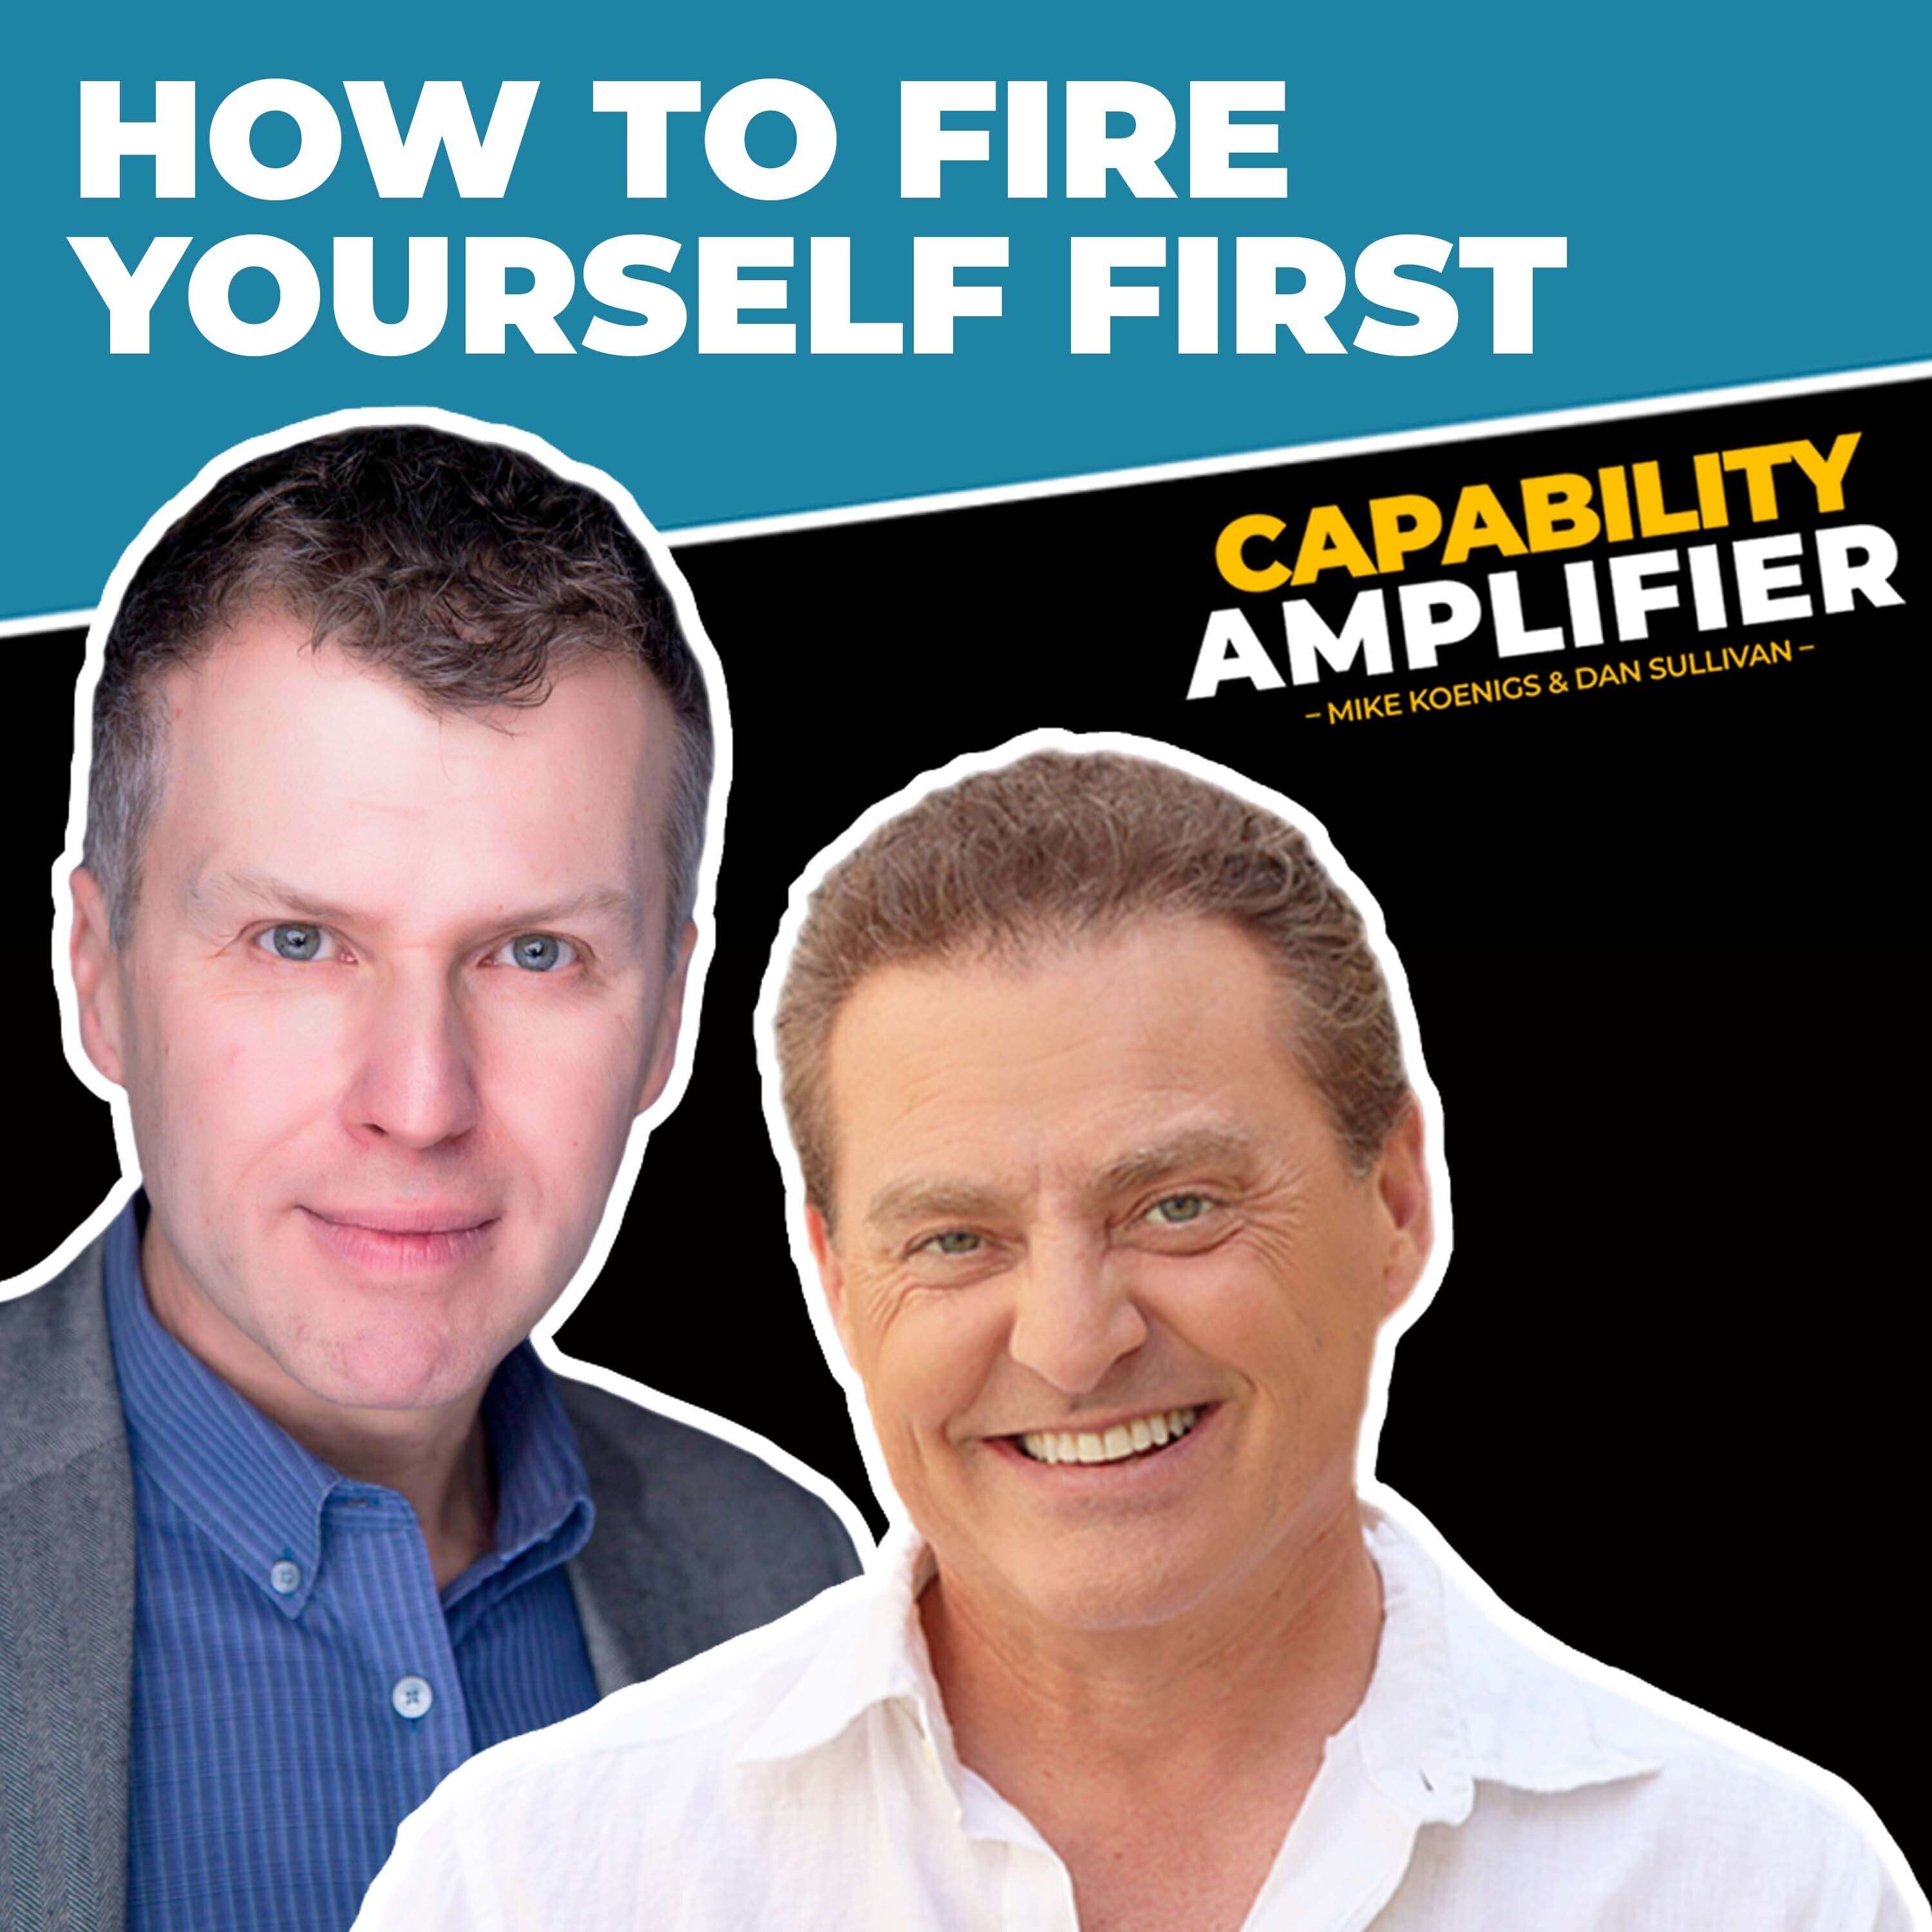 How to Fire Yourself First